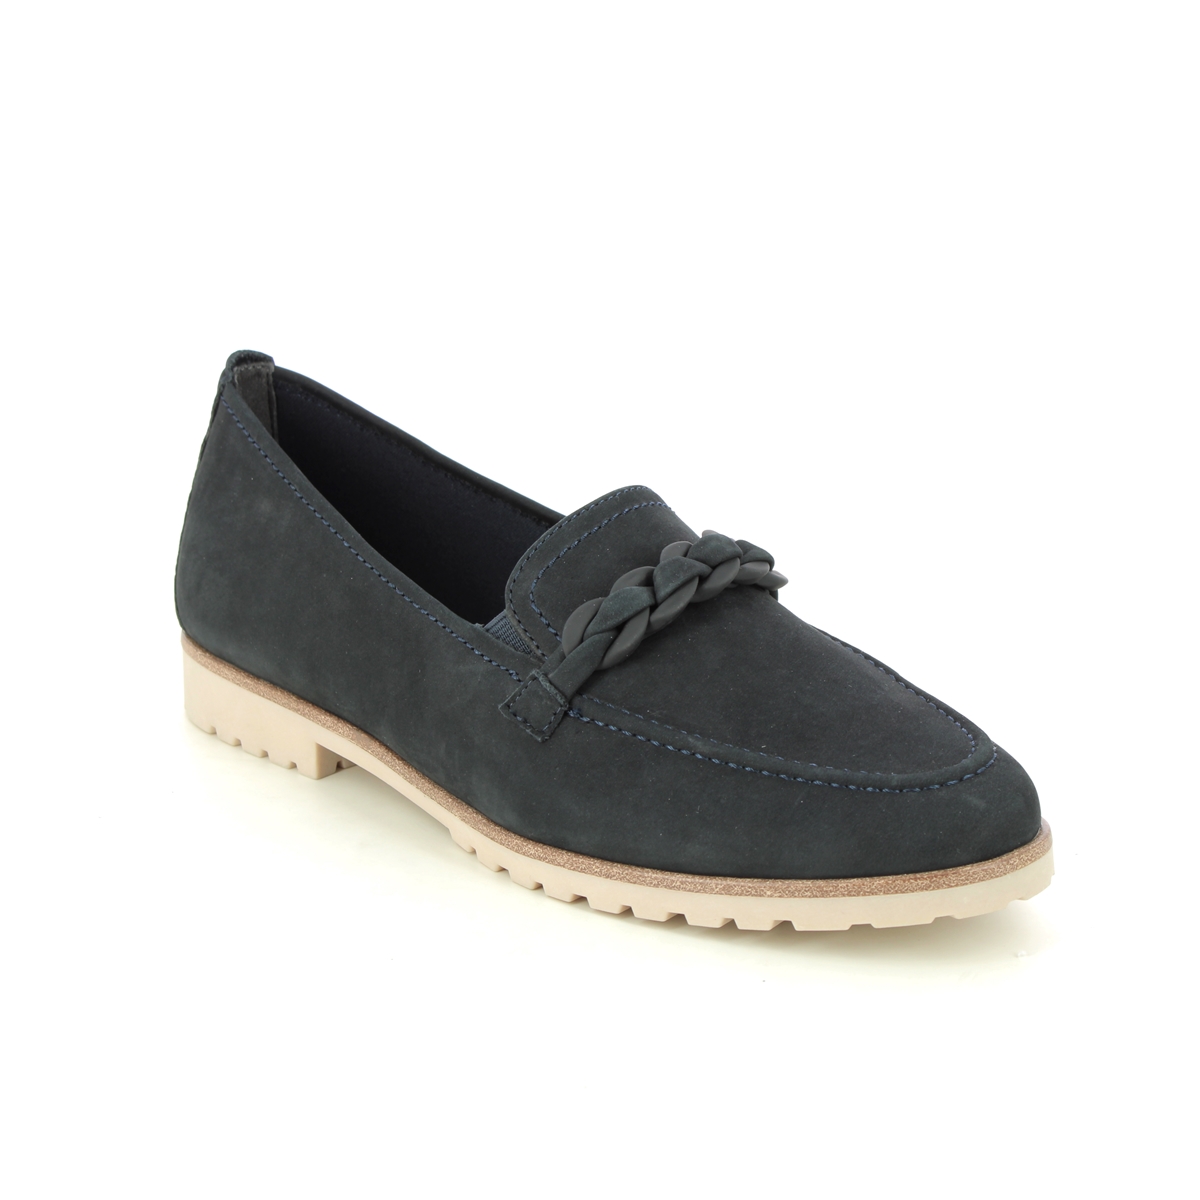 Tamaris Careen Loafer Navy Nubuck Womens Loafers 24200-20-805 In Size 39 In Plain Navy Nubuck